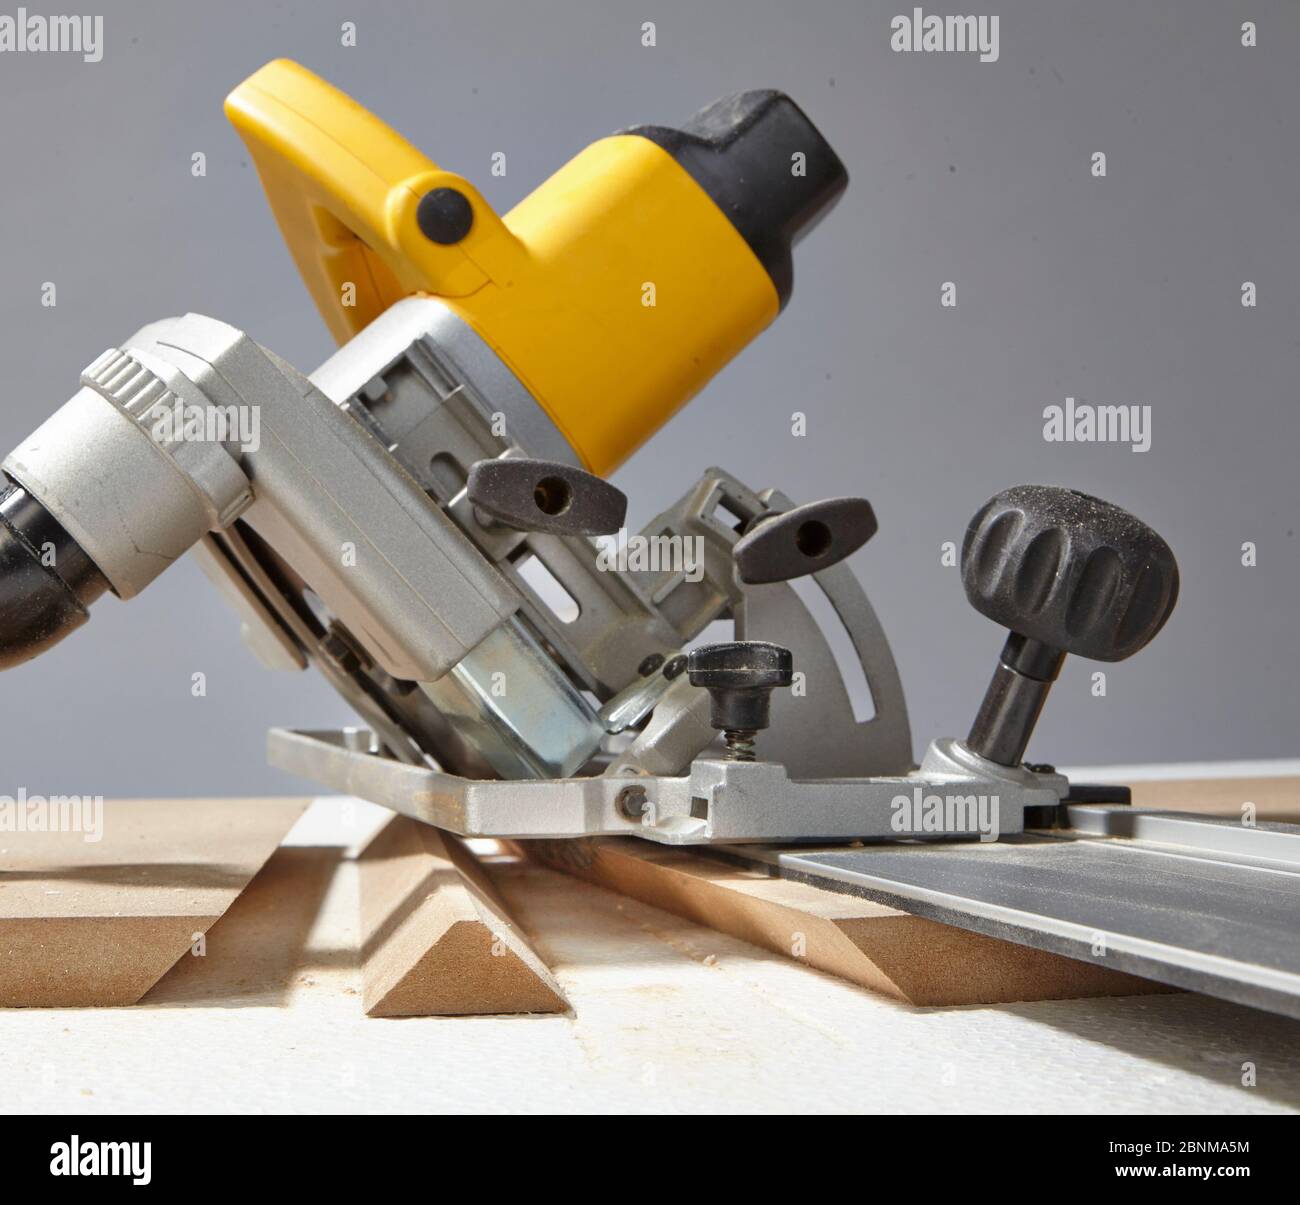 Construction of a shelf made of wood, Euro pallet, solid wood, MDF board; Do-it-yourself production, step-by-step, step 7, sawing MDF boards to size with a hand-held circular saw, certain edges have a 45 degree miter cut Stock Photo